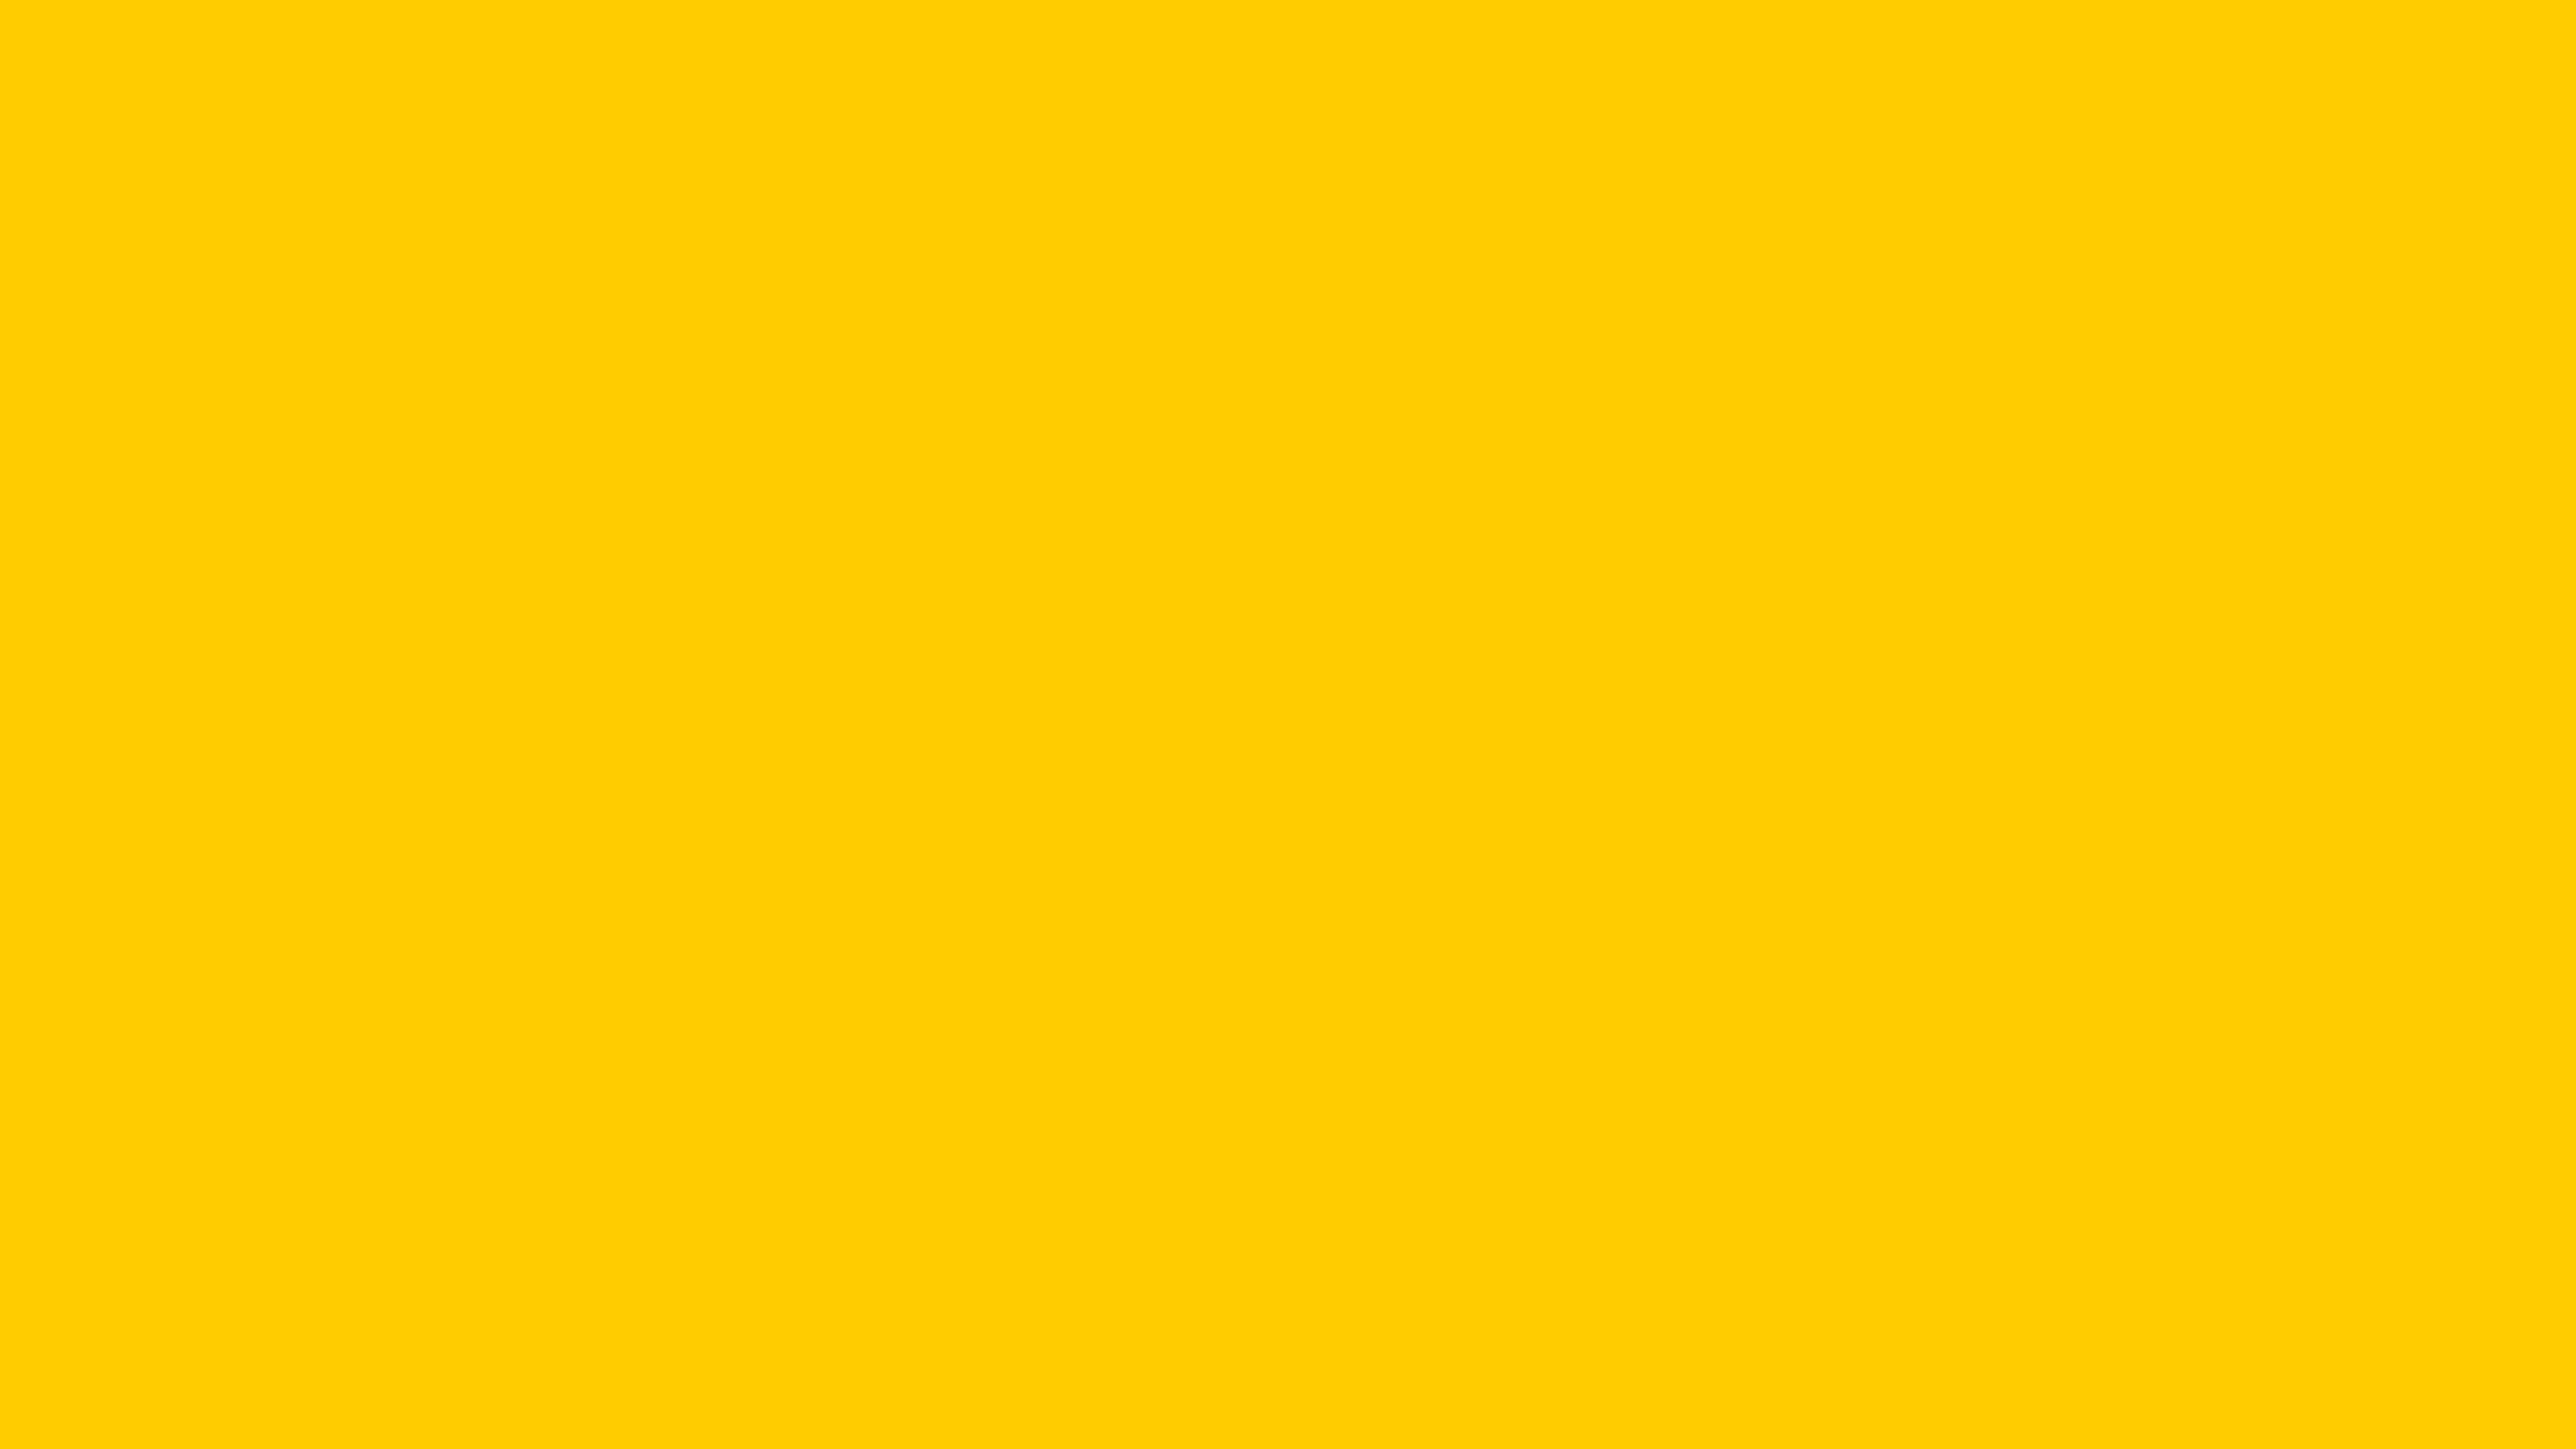 7680x4320 USC Gold Solid Color Background